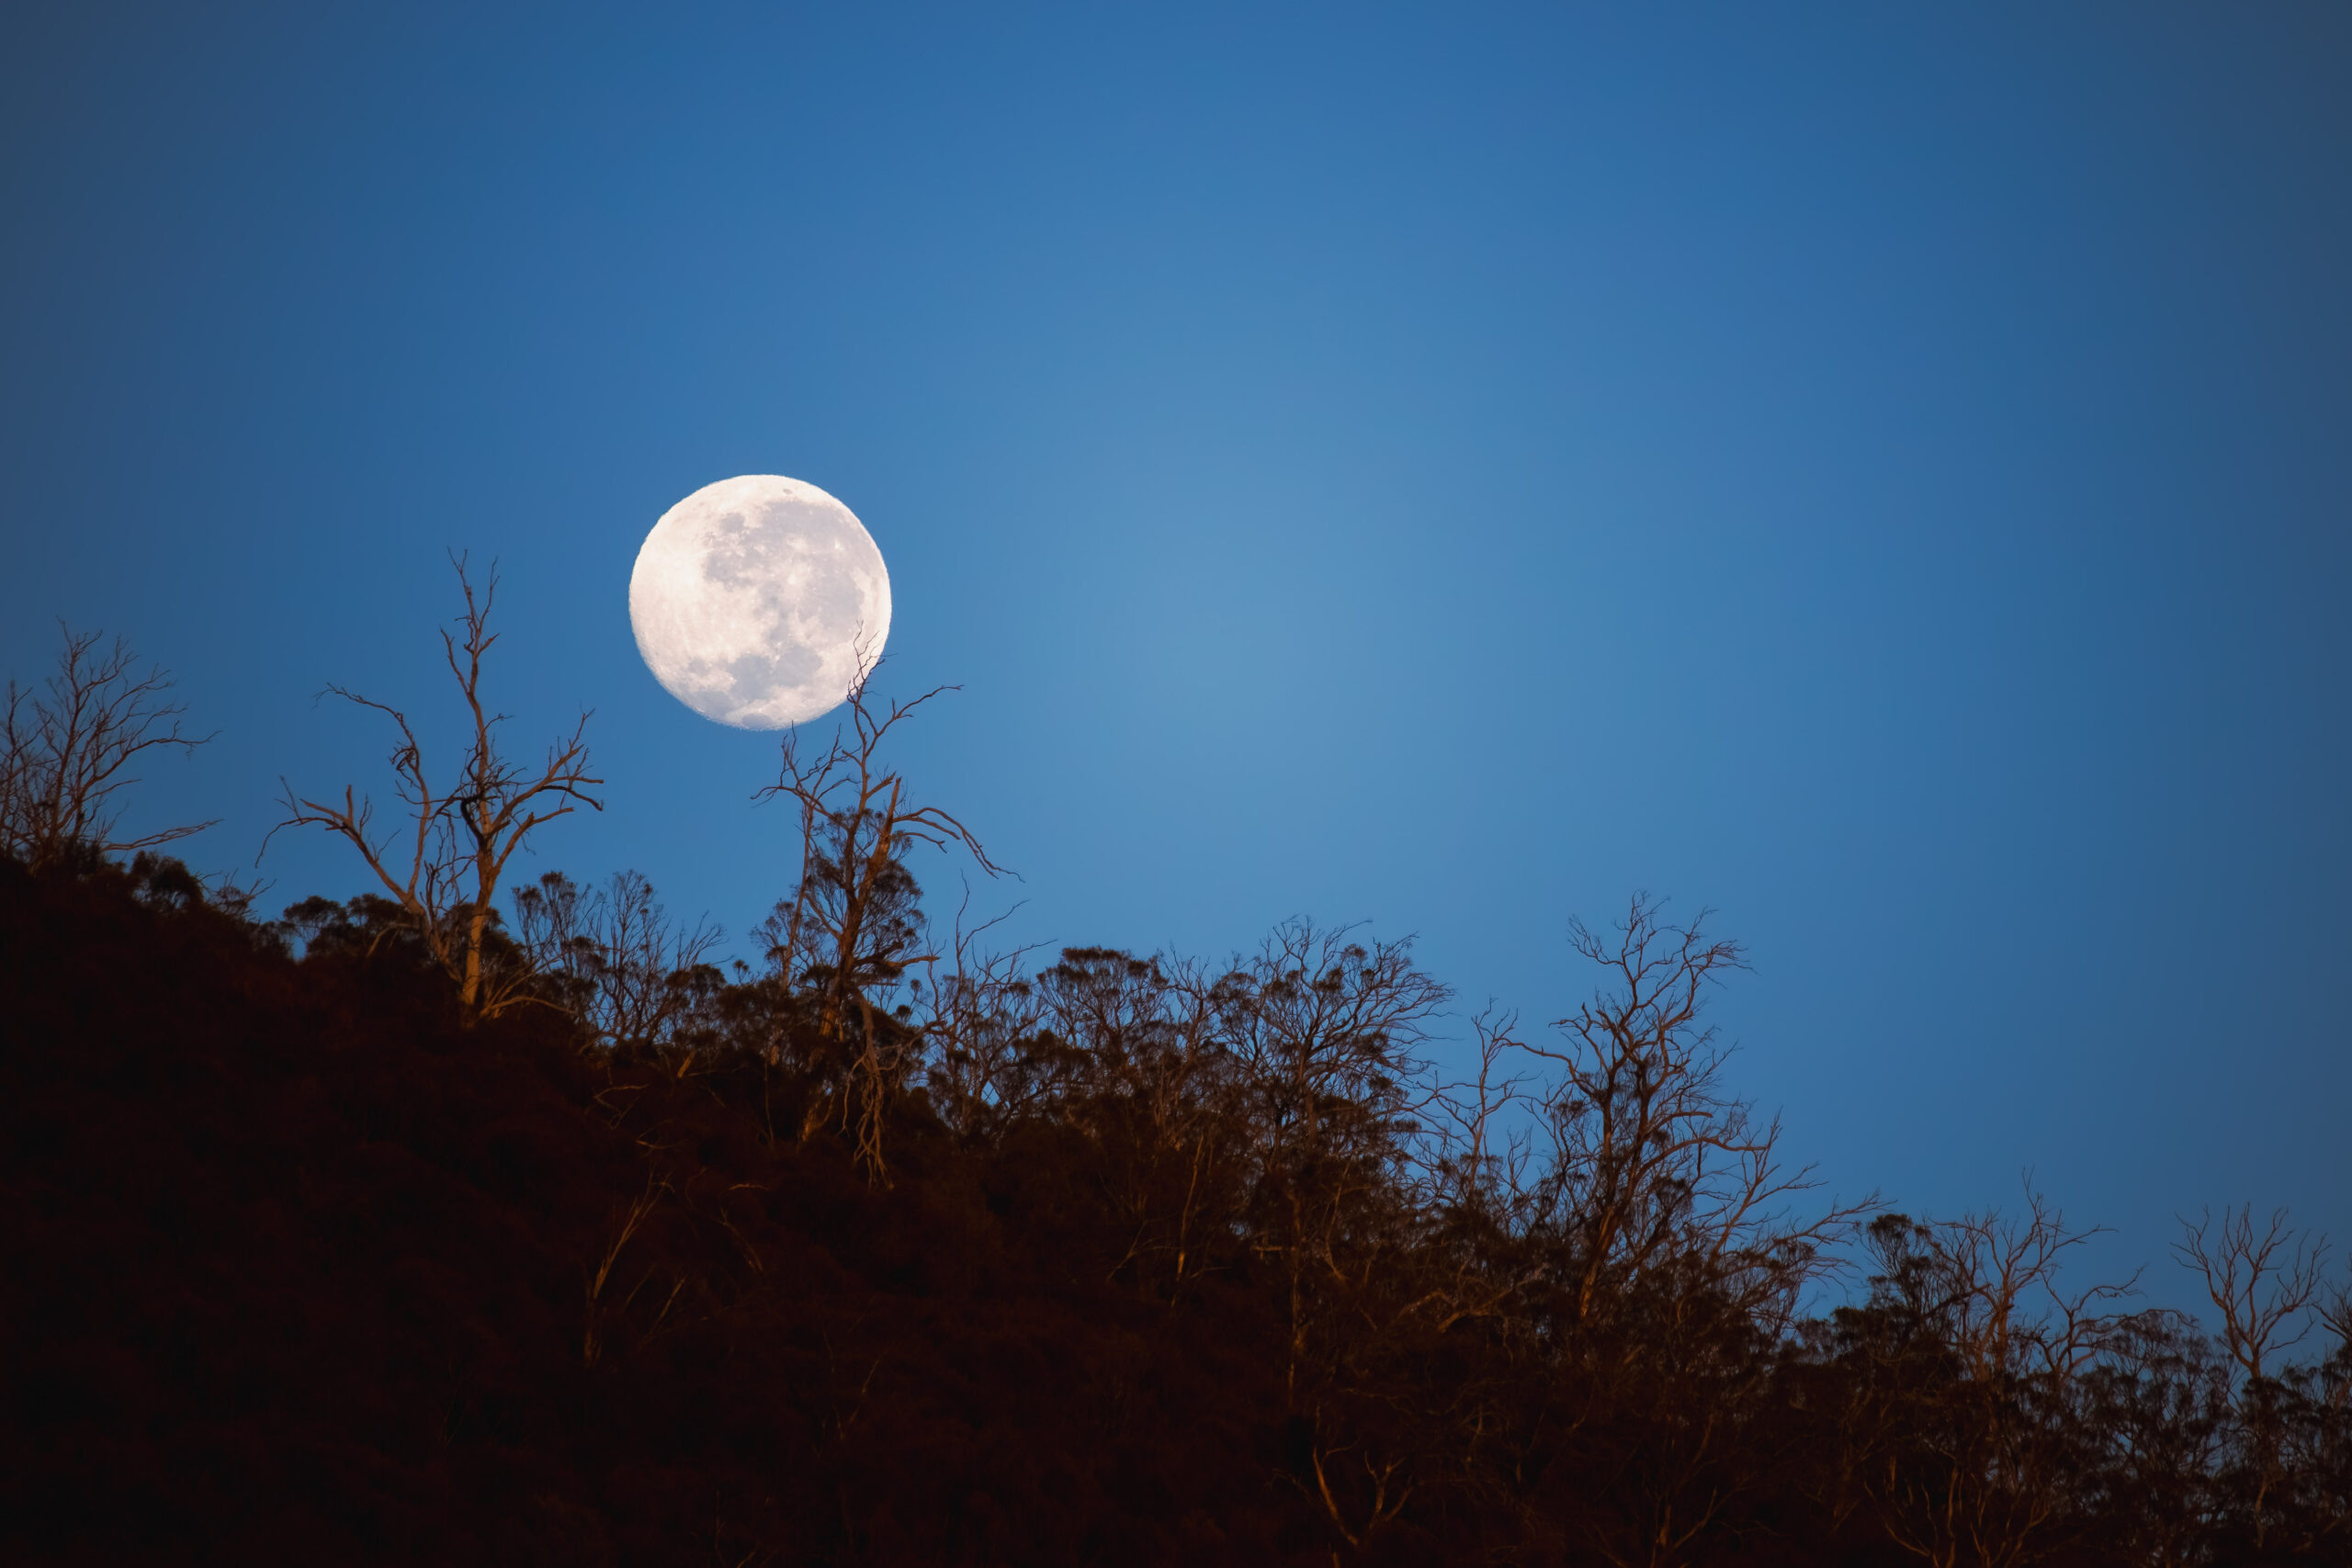 An almost-full moon setting over a tree-topped hill backed by blue sky